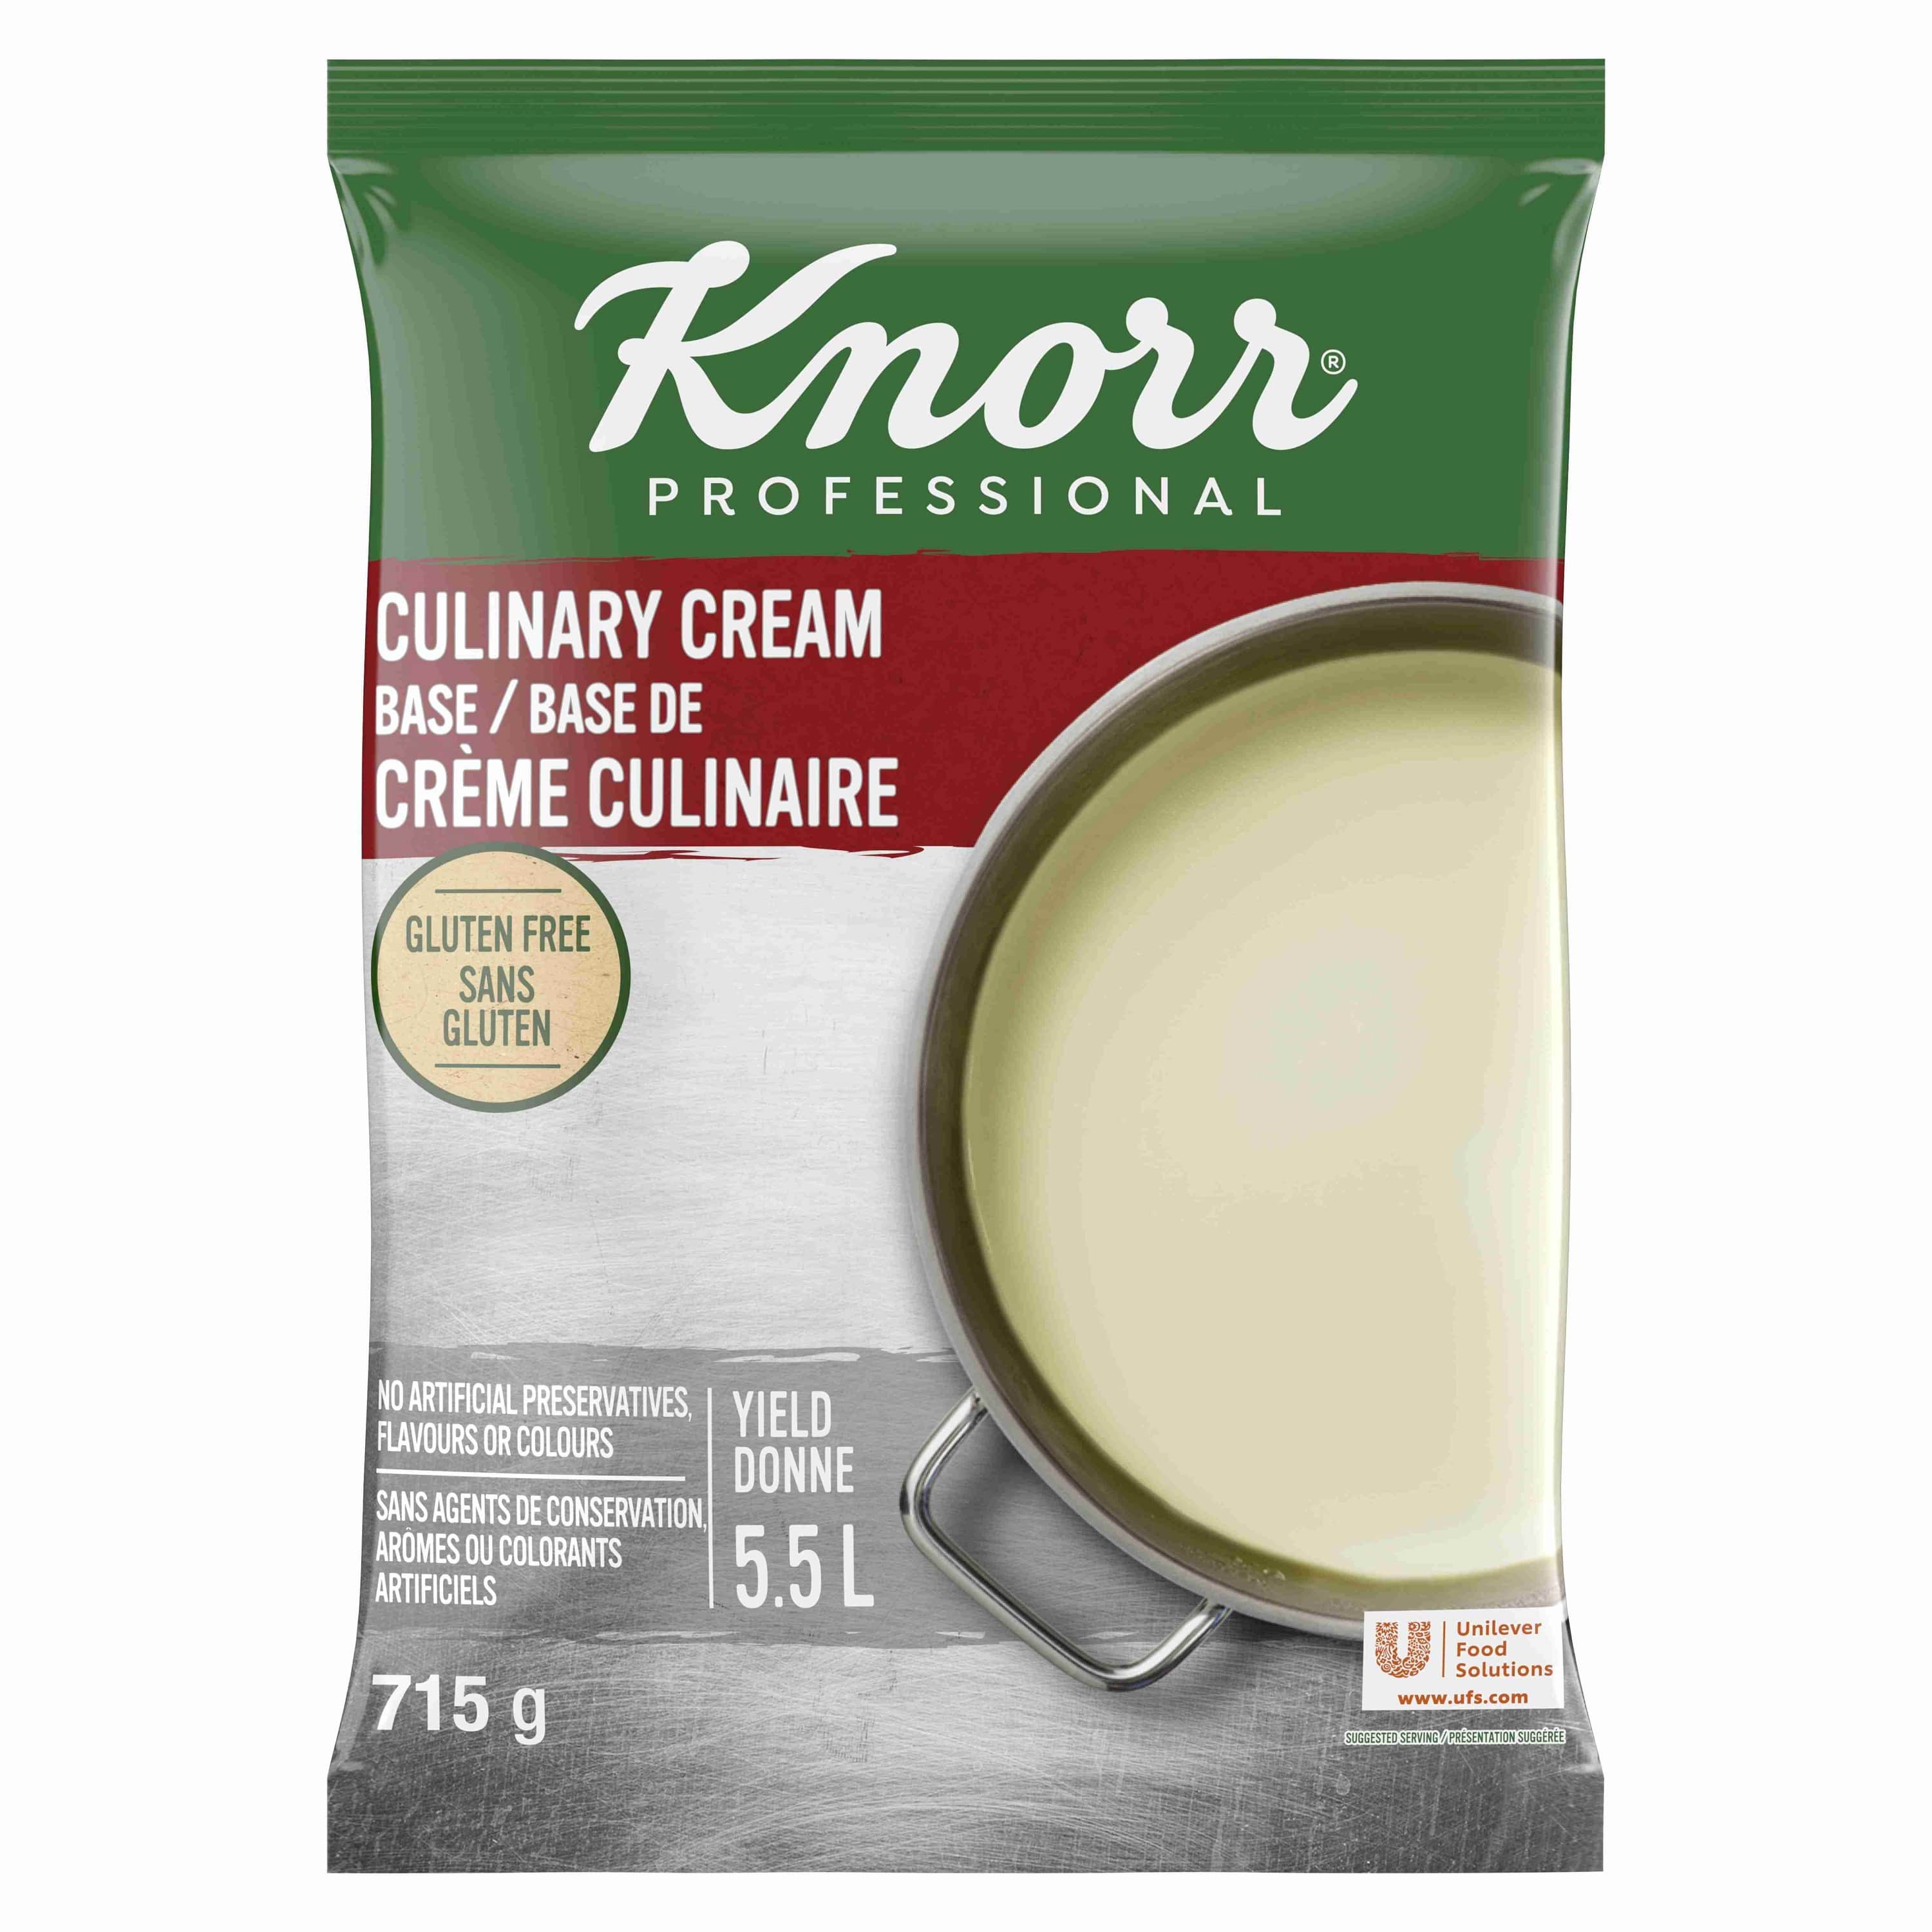 Knorr® Professional Culinary Cream Base 6 x 715 gr - Mix with any temperature of water to thicken